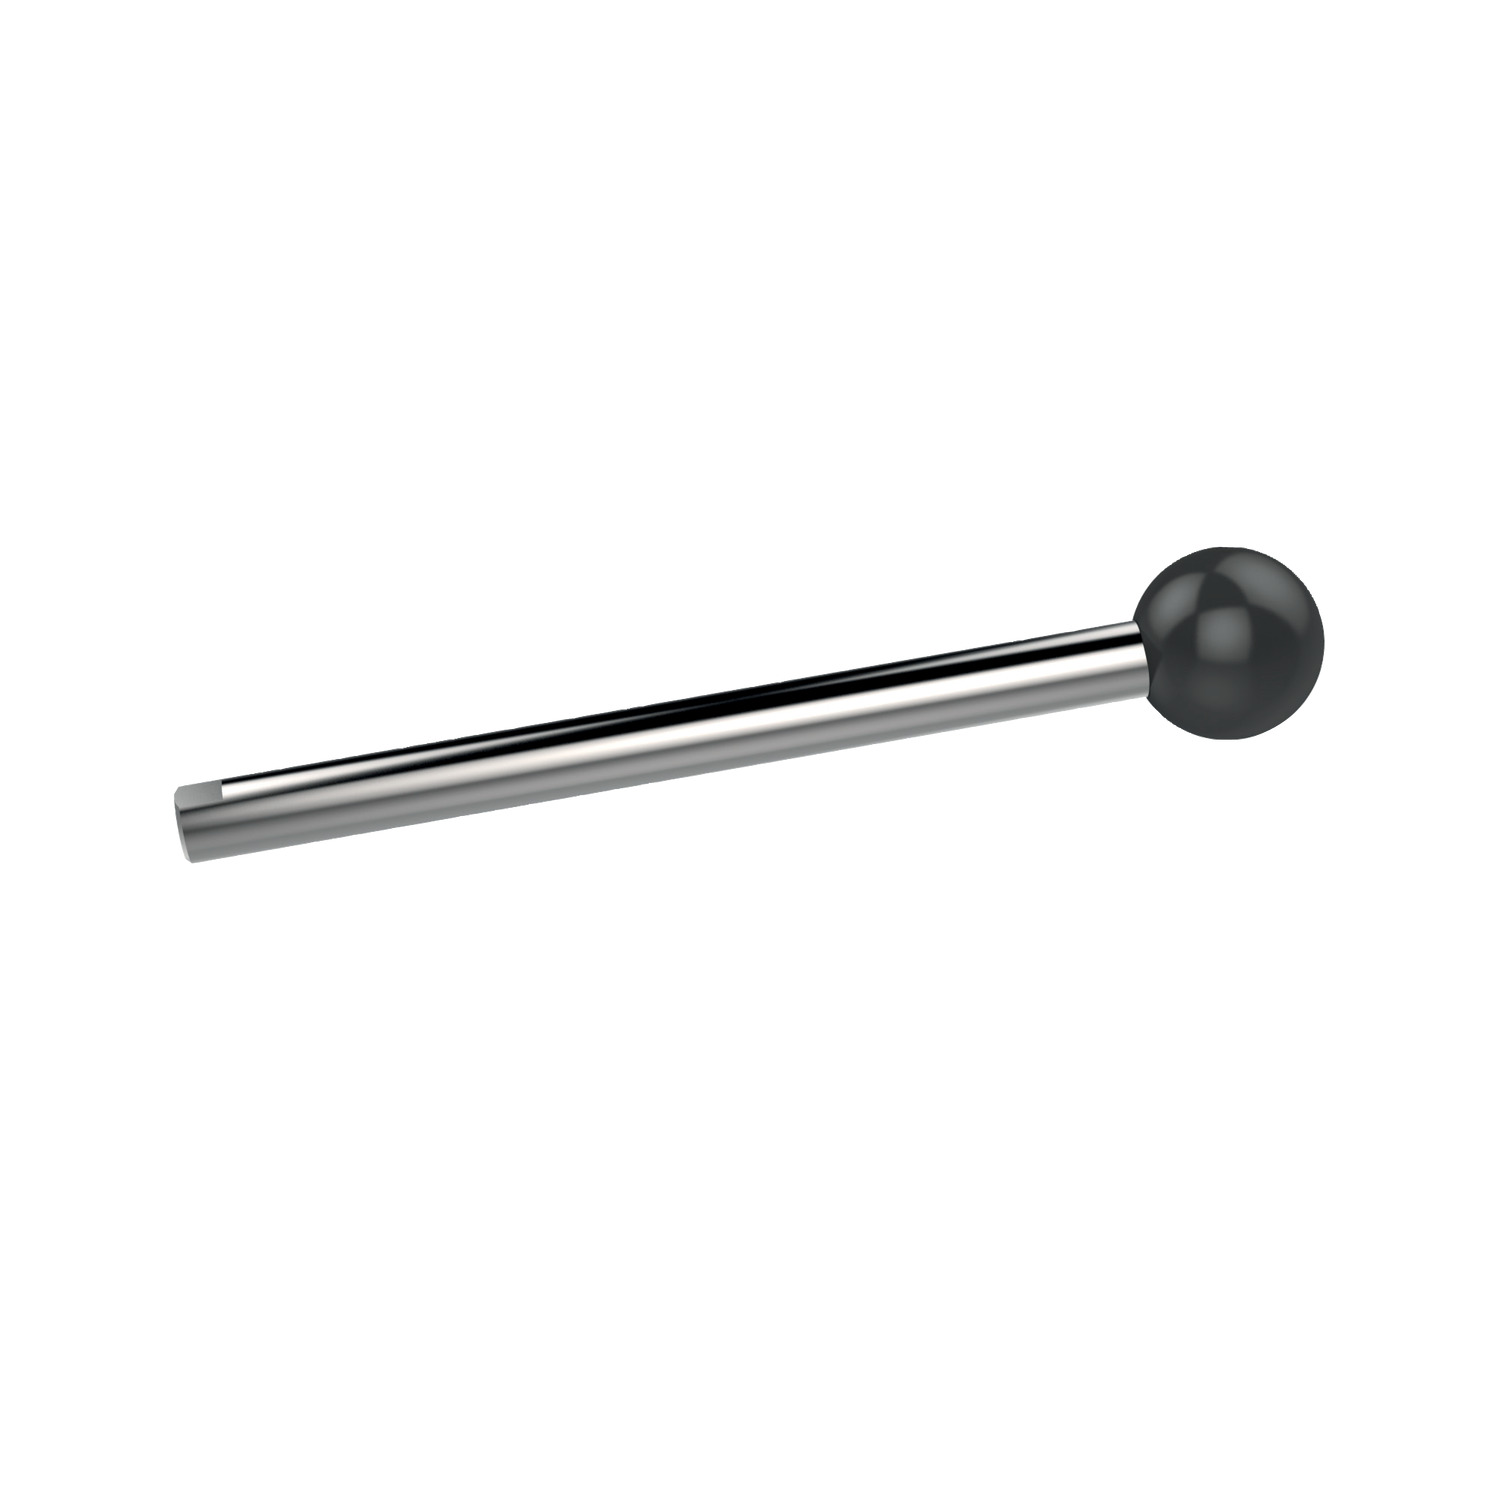 Product 12616.2, Handles For Thrust Clamps for 12615 & 12616 / 